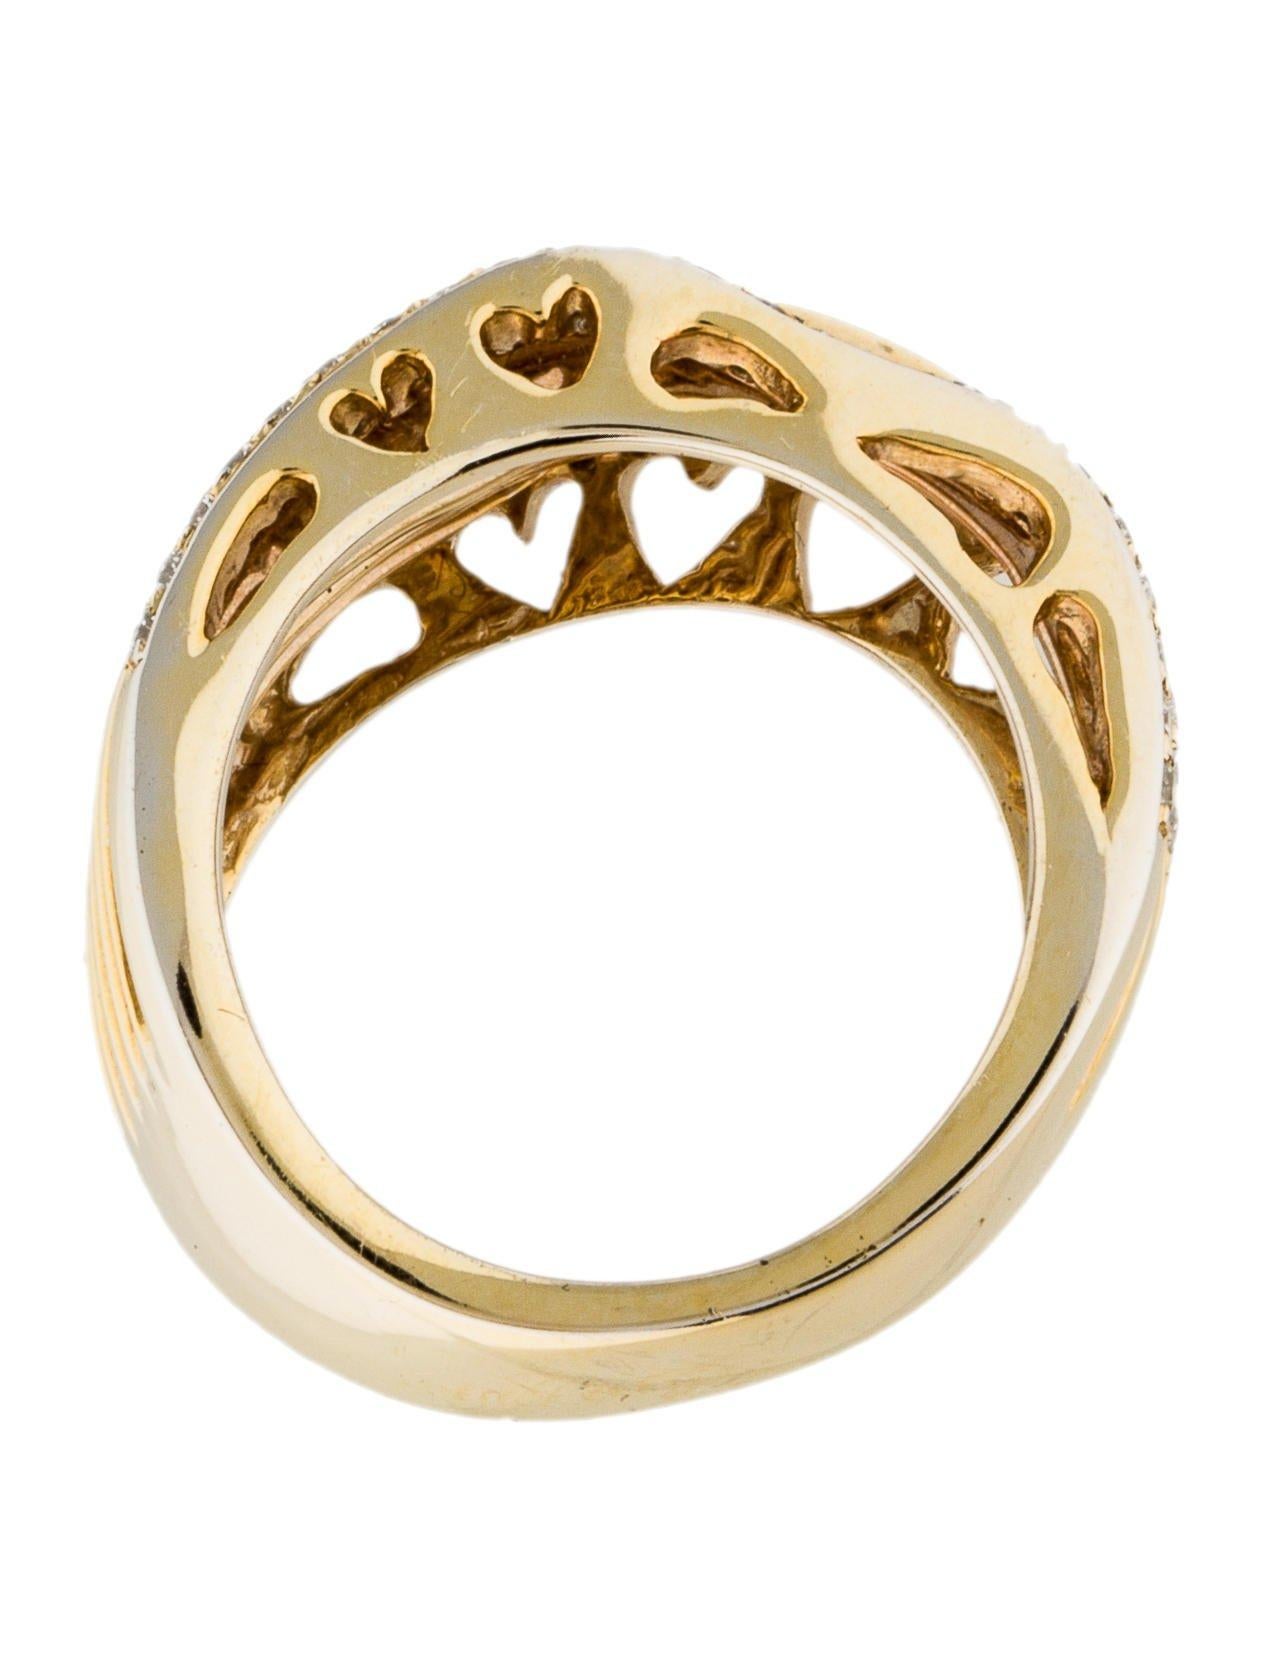 18K yellow gold openwork band featuring 0.58 carats of round brilliant diamonds.

Ring Size: 6.75
Sizing: This ring can be adjusted one whole size larger or smaller by most professional jewelers.
Metal Type: 18K Yellow Gold
Hallmark: 18K, 750,